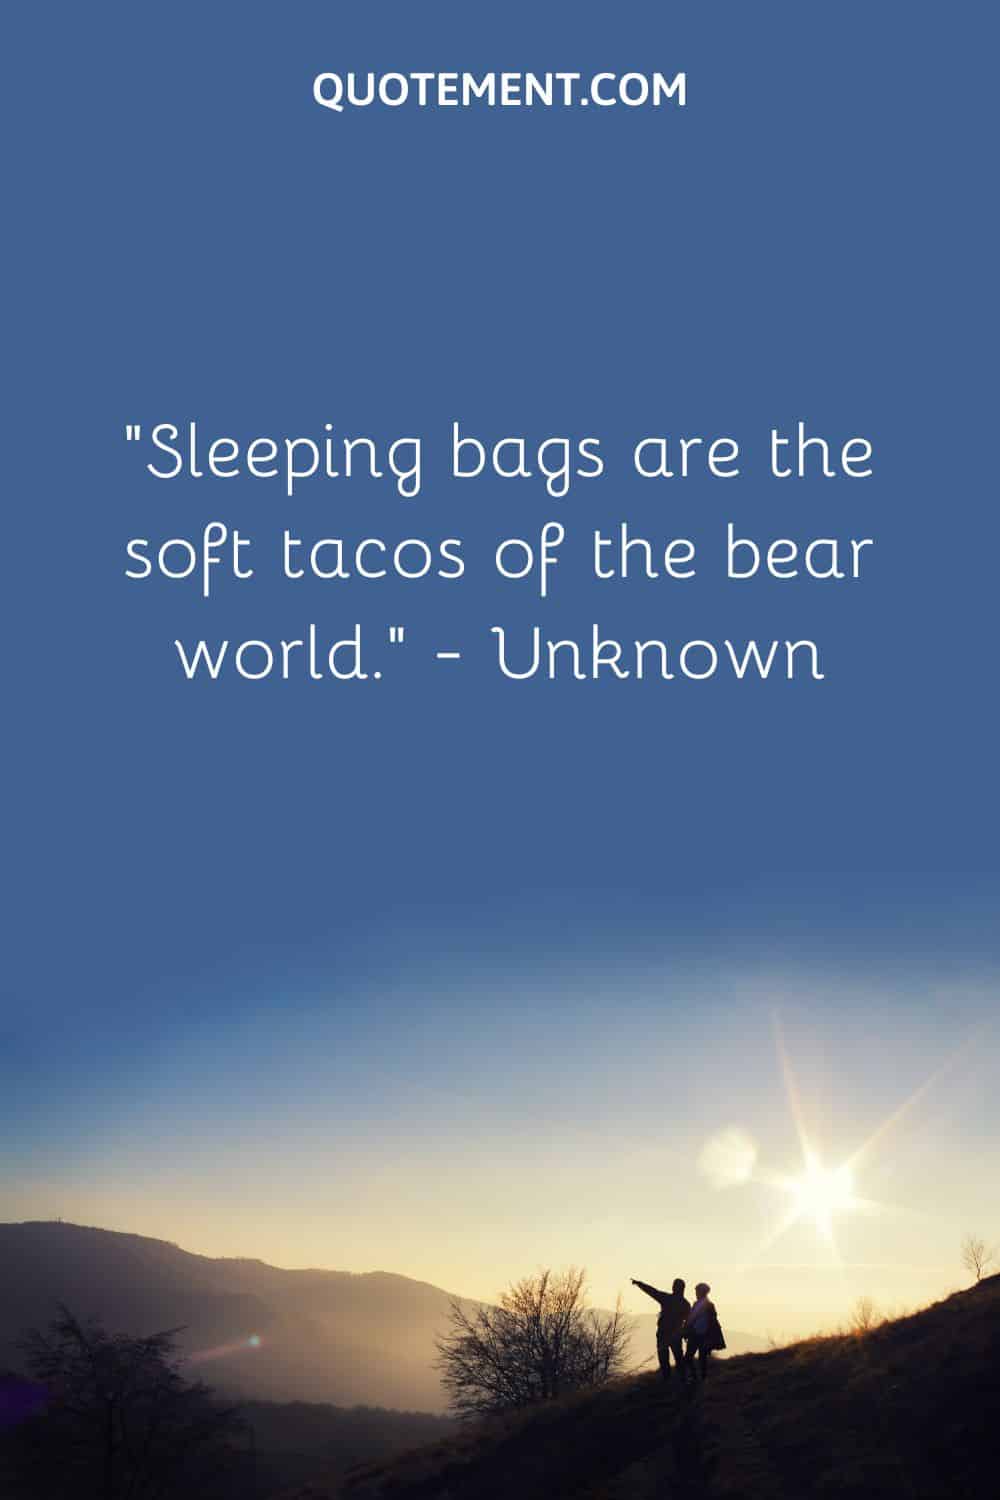 “Sleeping bags are the soft tacos of the bear world.” — Unknown